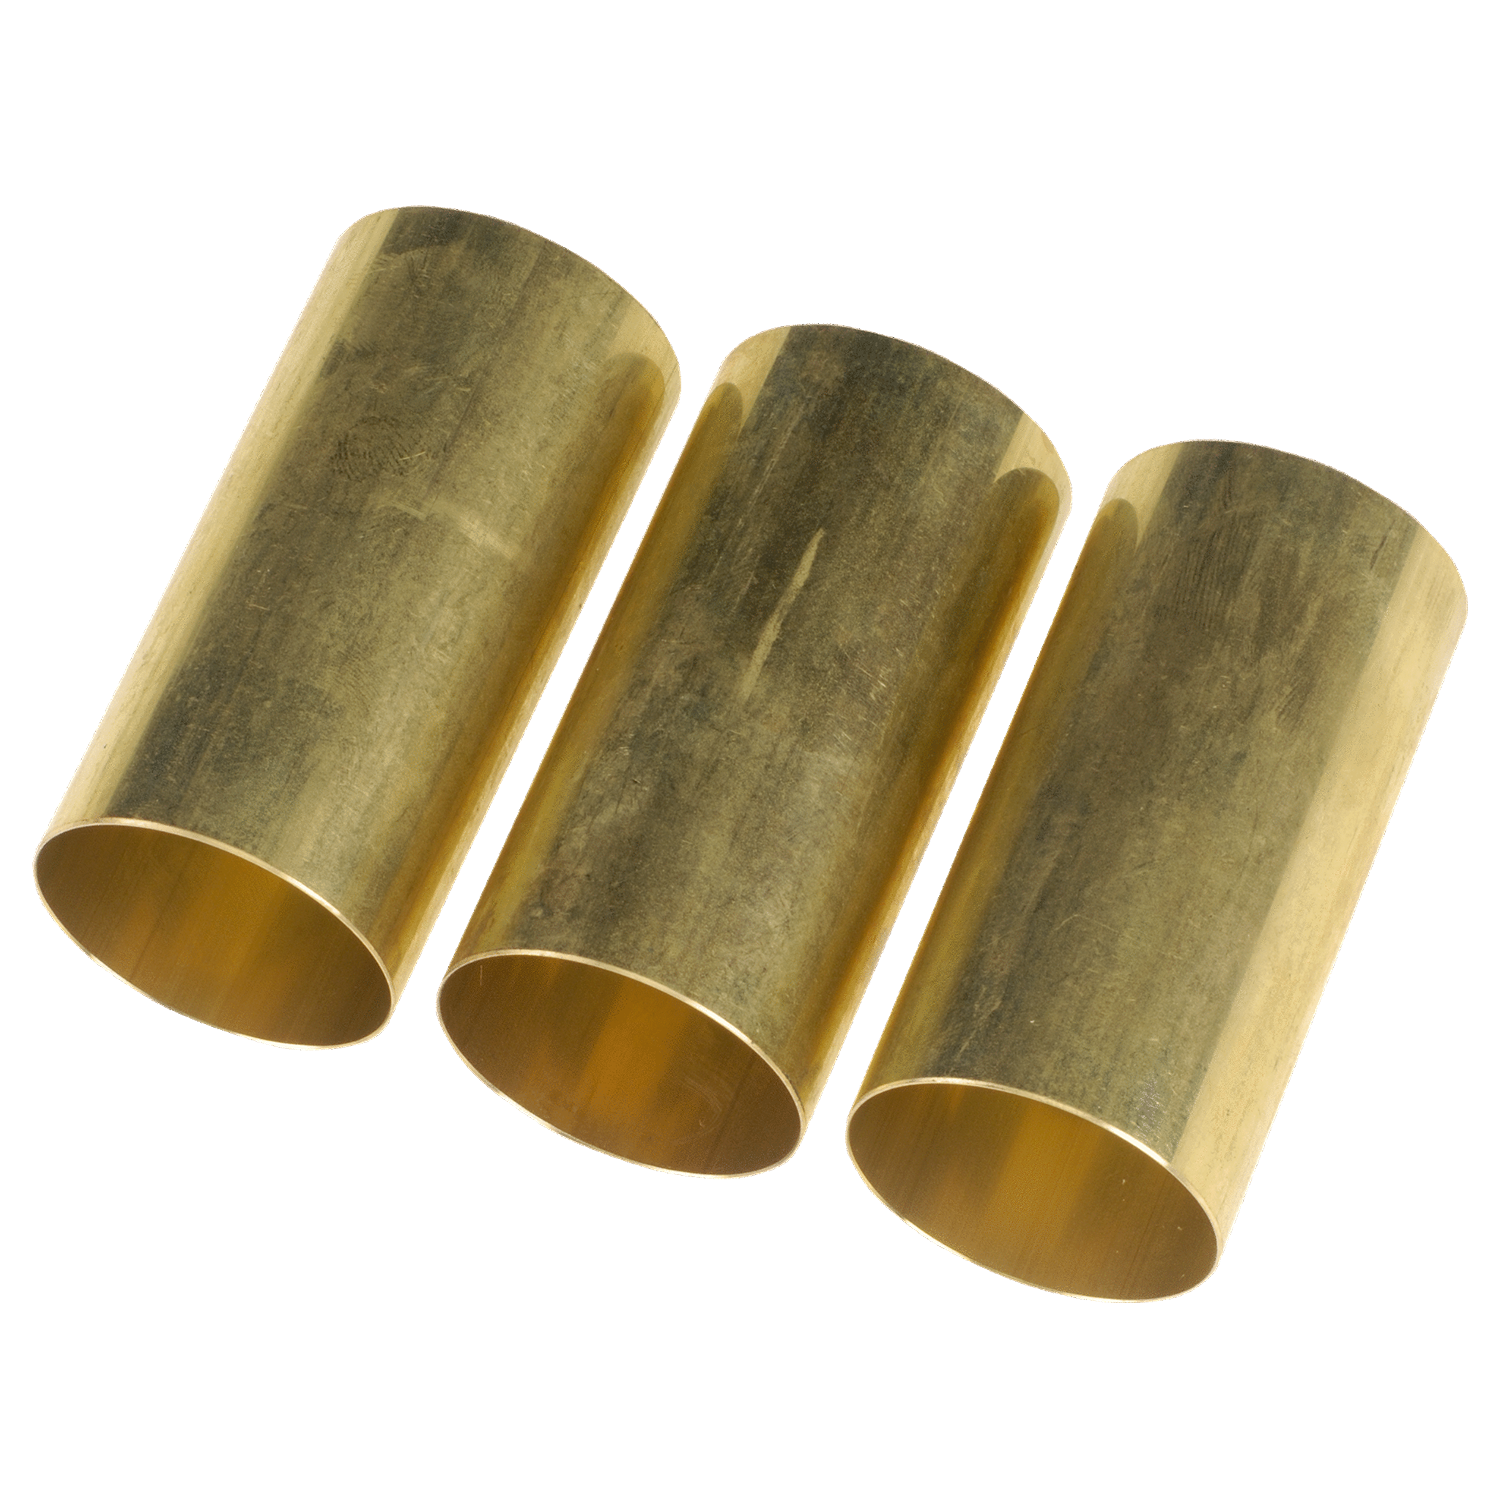 BAHCO 9210-1720100 Brass Sleeve for 9210 Air Secateur - 10 Pcs - Premium Brass Sleeve from BAHCO - Shop now at Yew Aik.